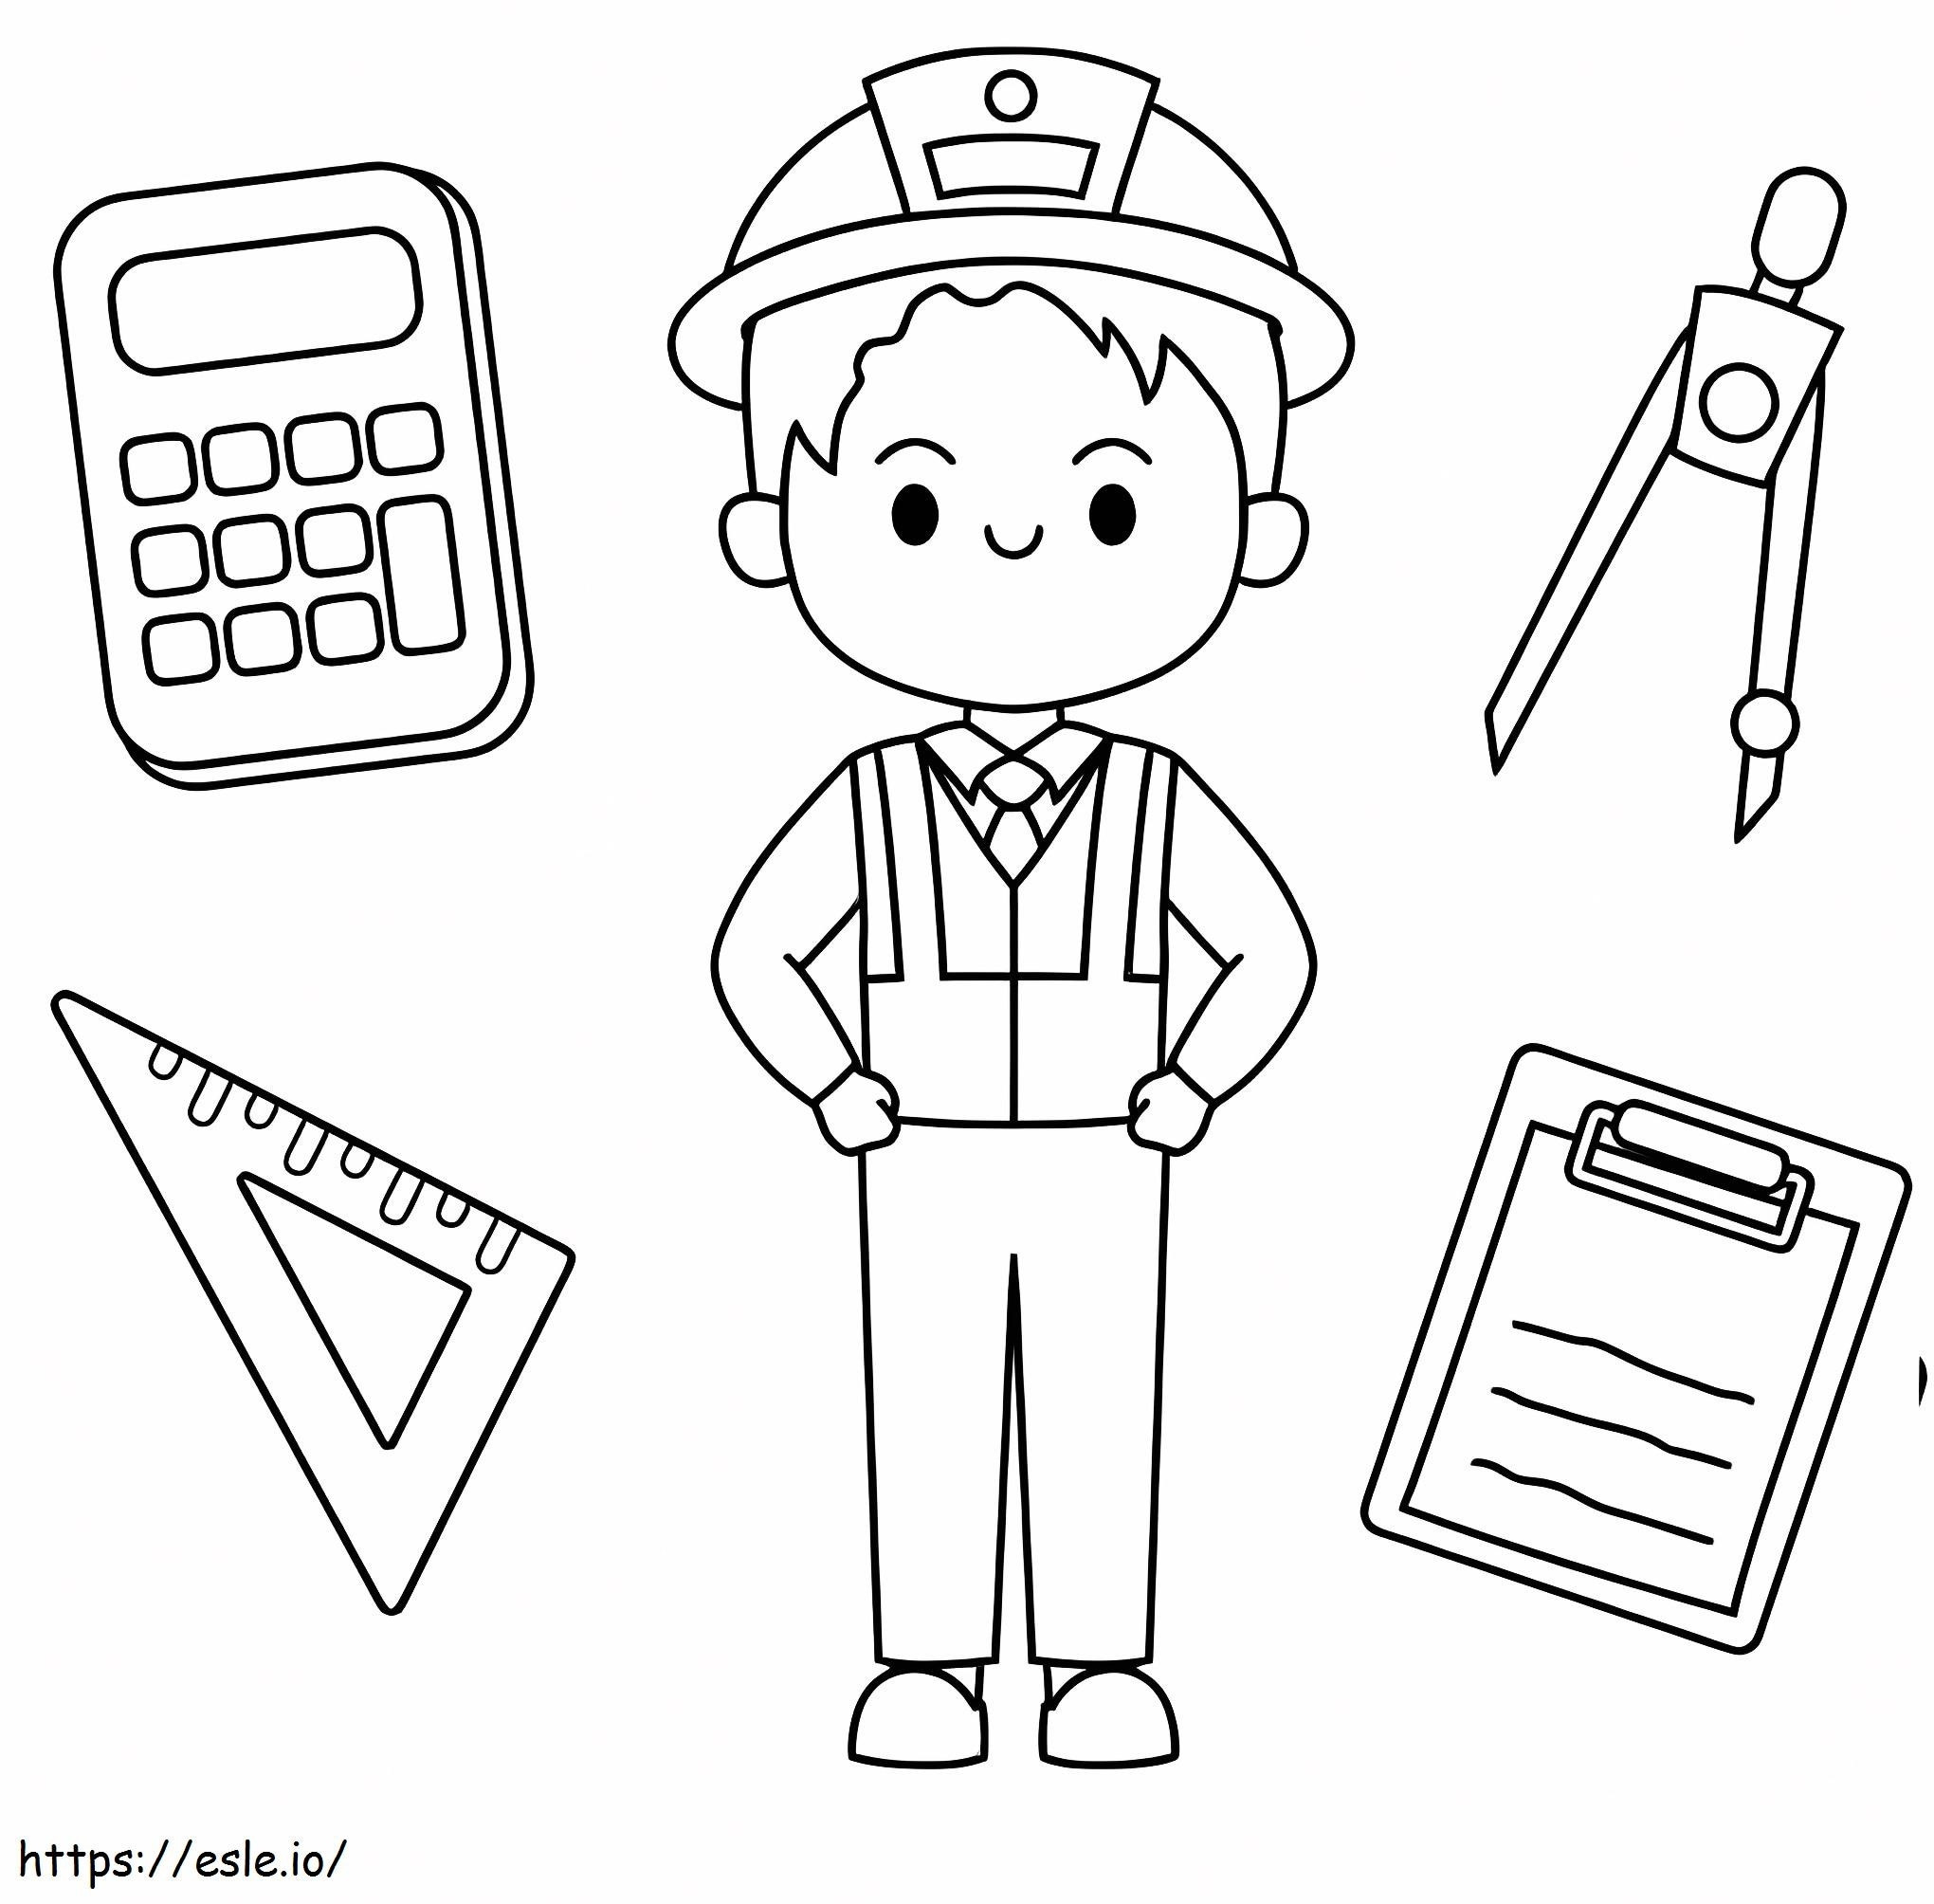 Cute Engineer coloring page